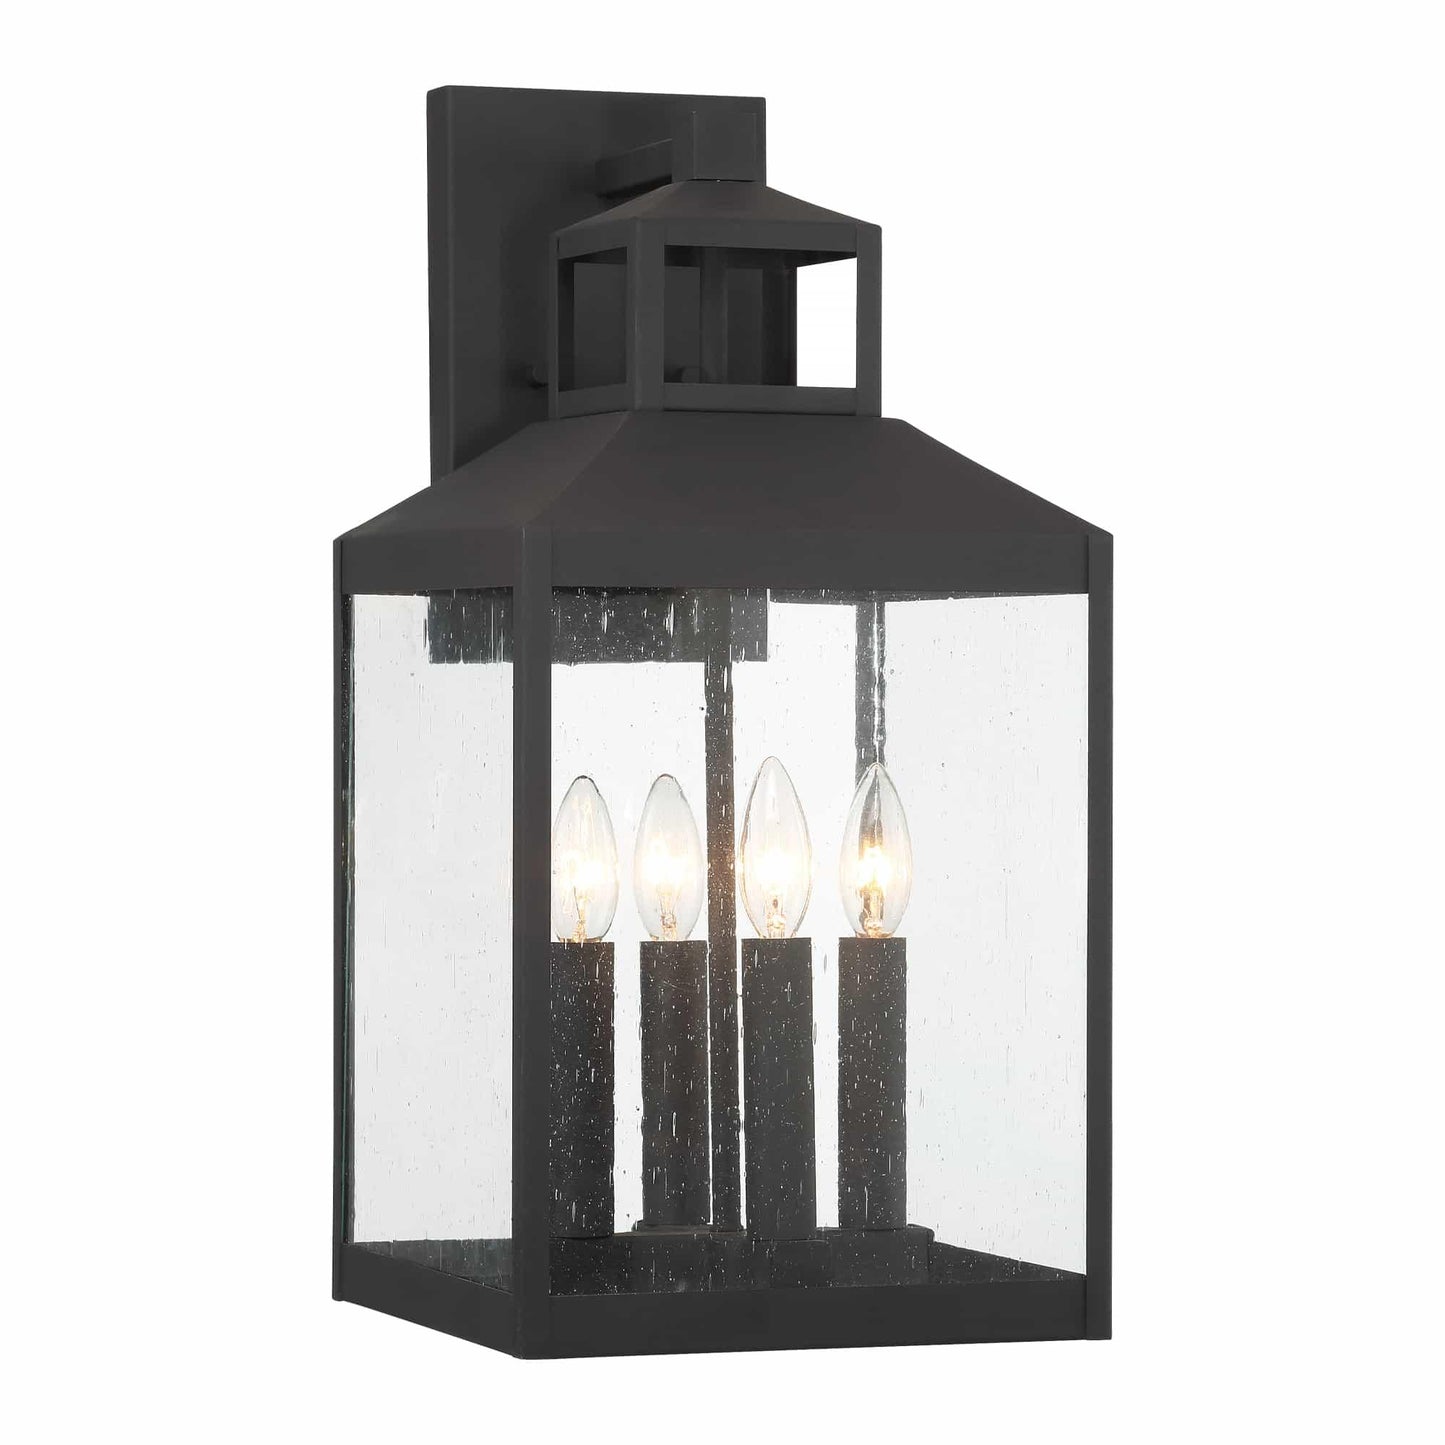 4 light outdoor lantern wall sconce (8) by ACROMA